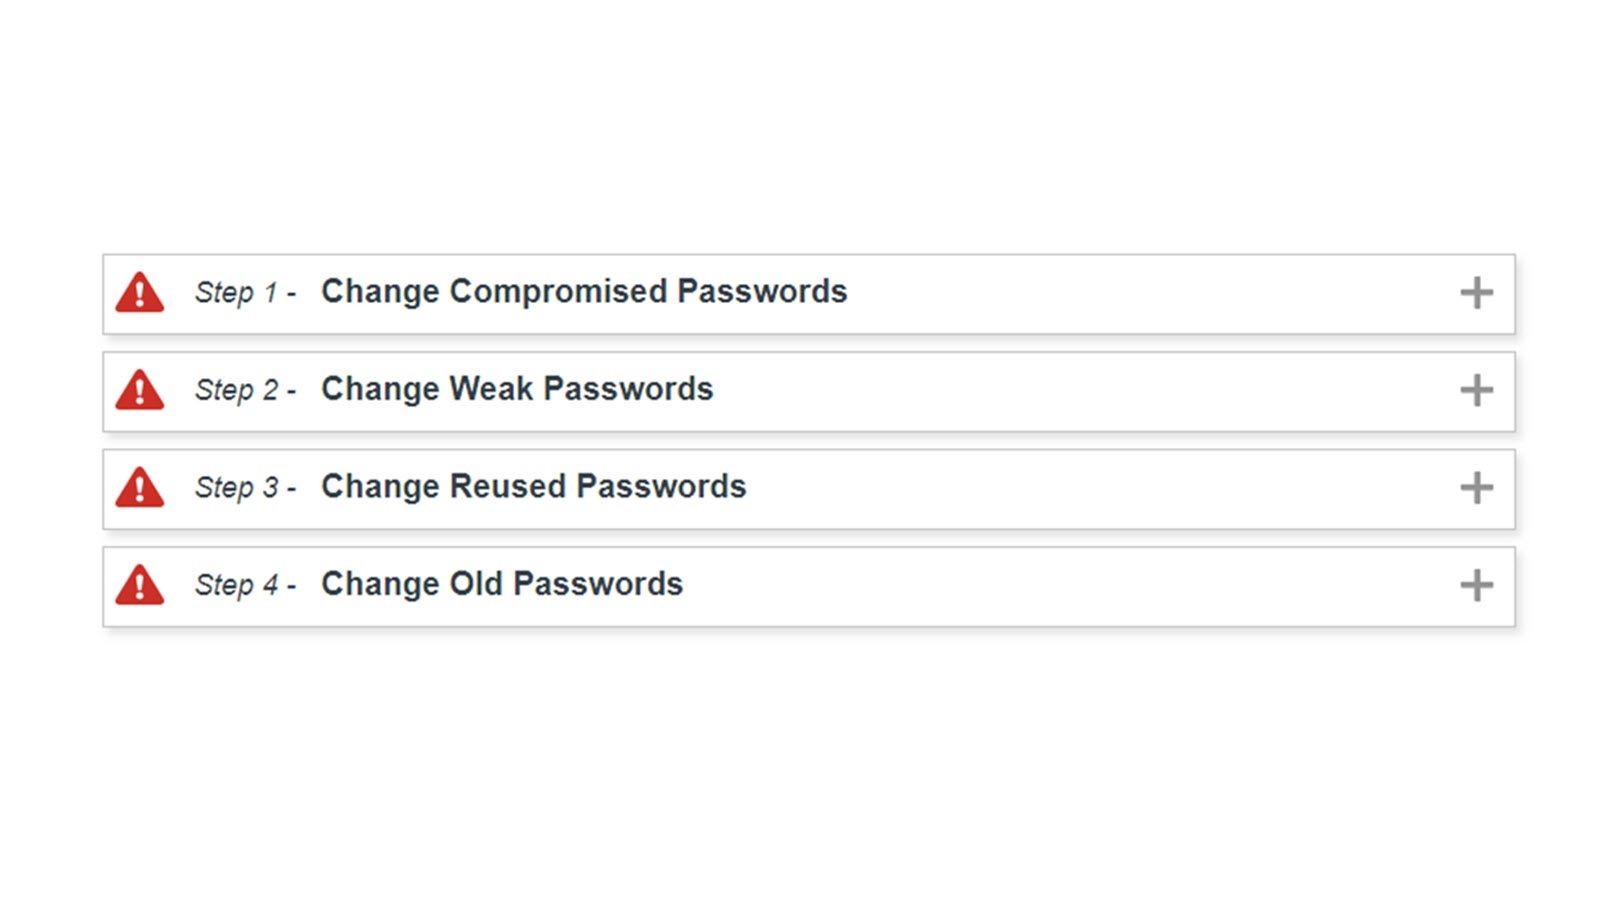 A LastPass provided four step process for changing passwords, including compromised passwords.